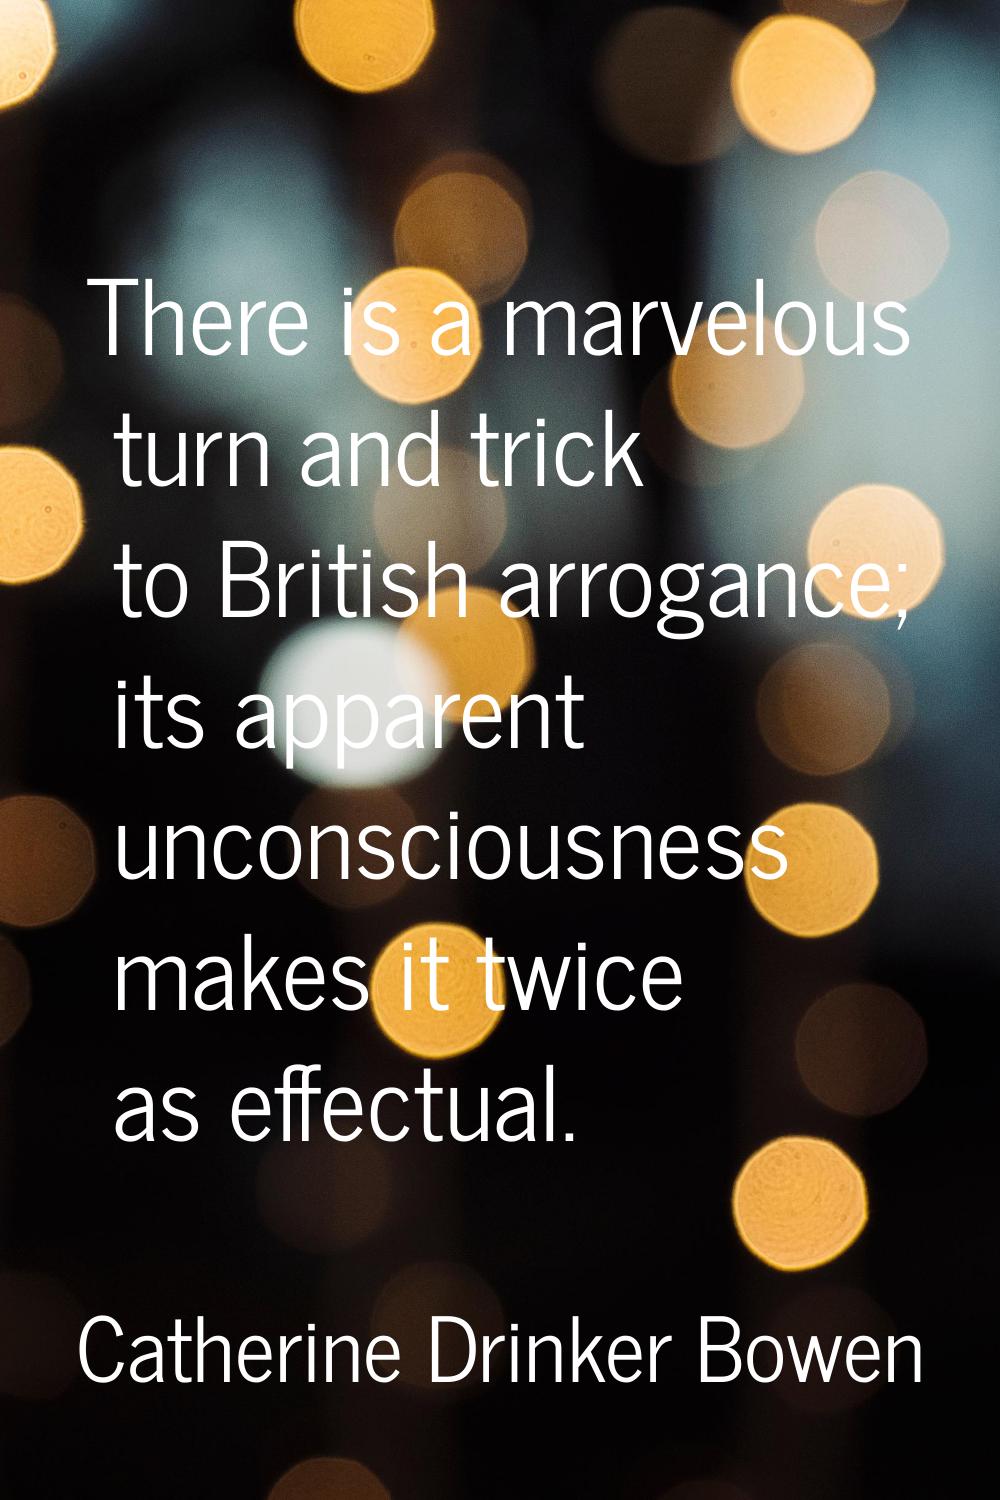 There is a marvelous turn and trick to British arrogance; its apparent unconsciousness makes it twi